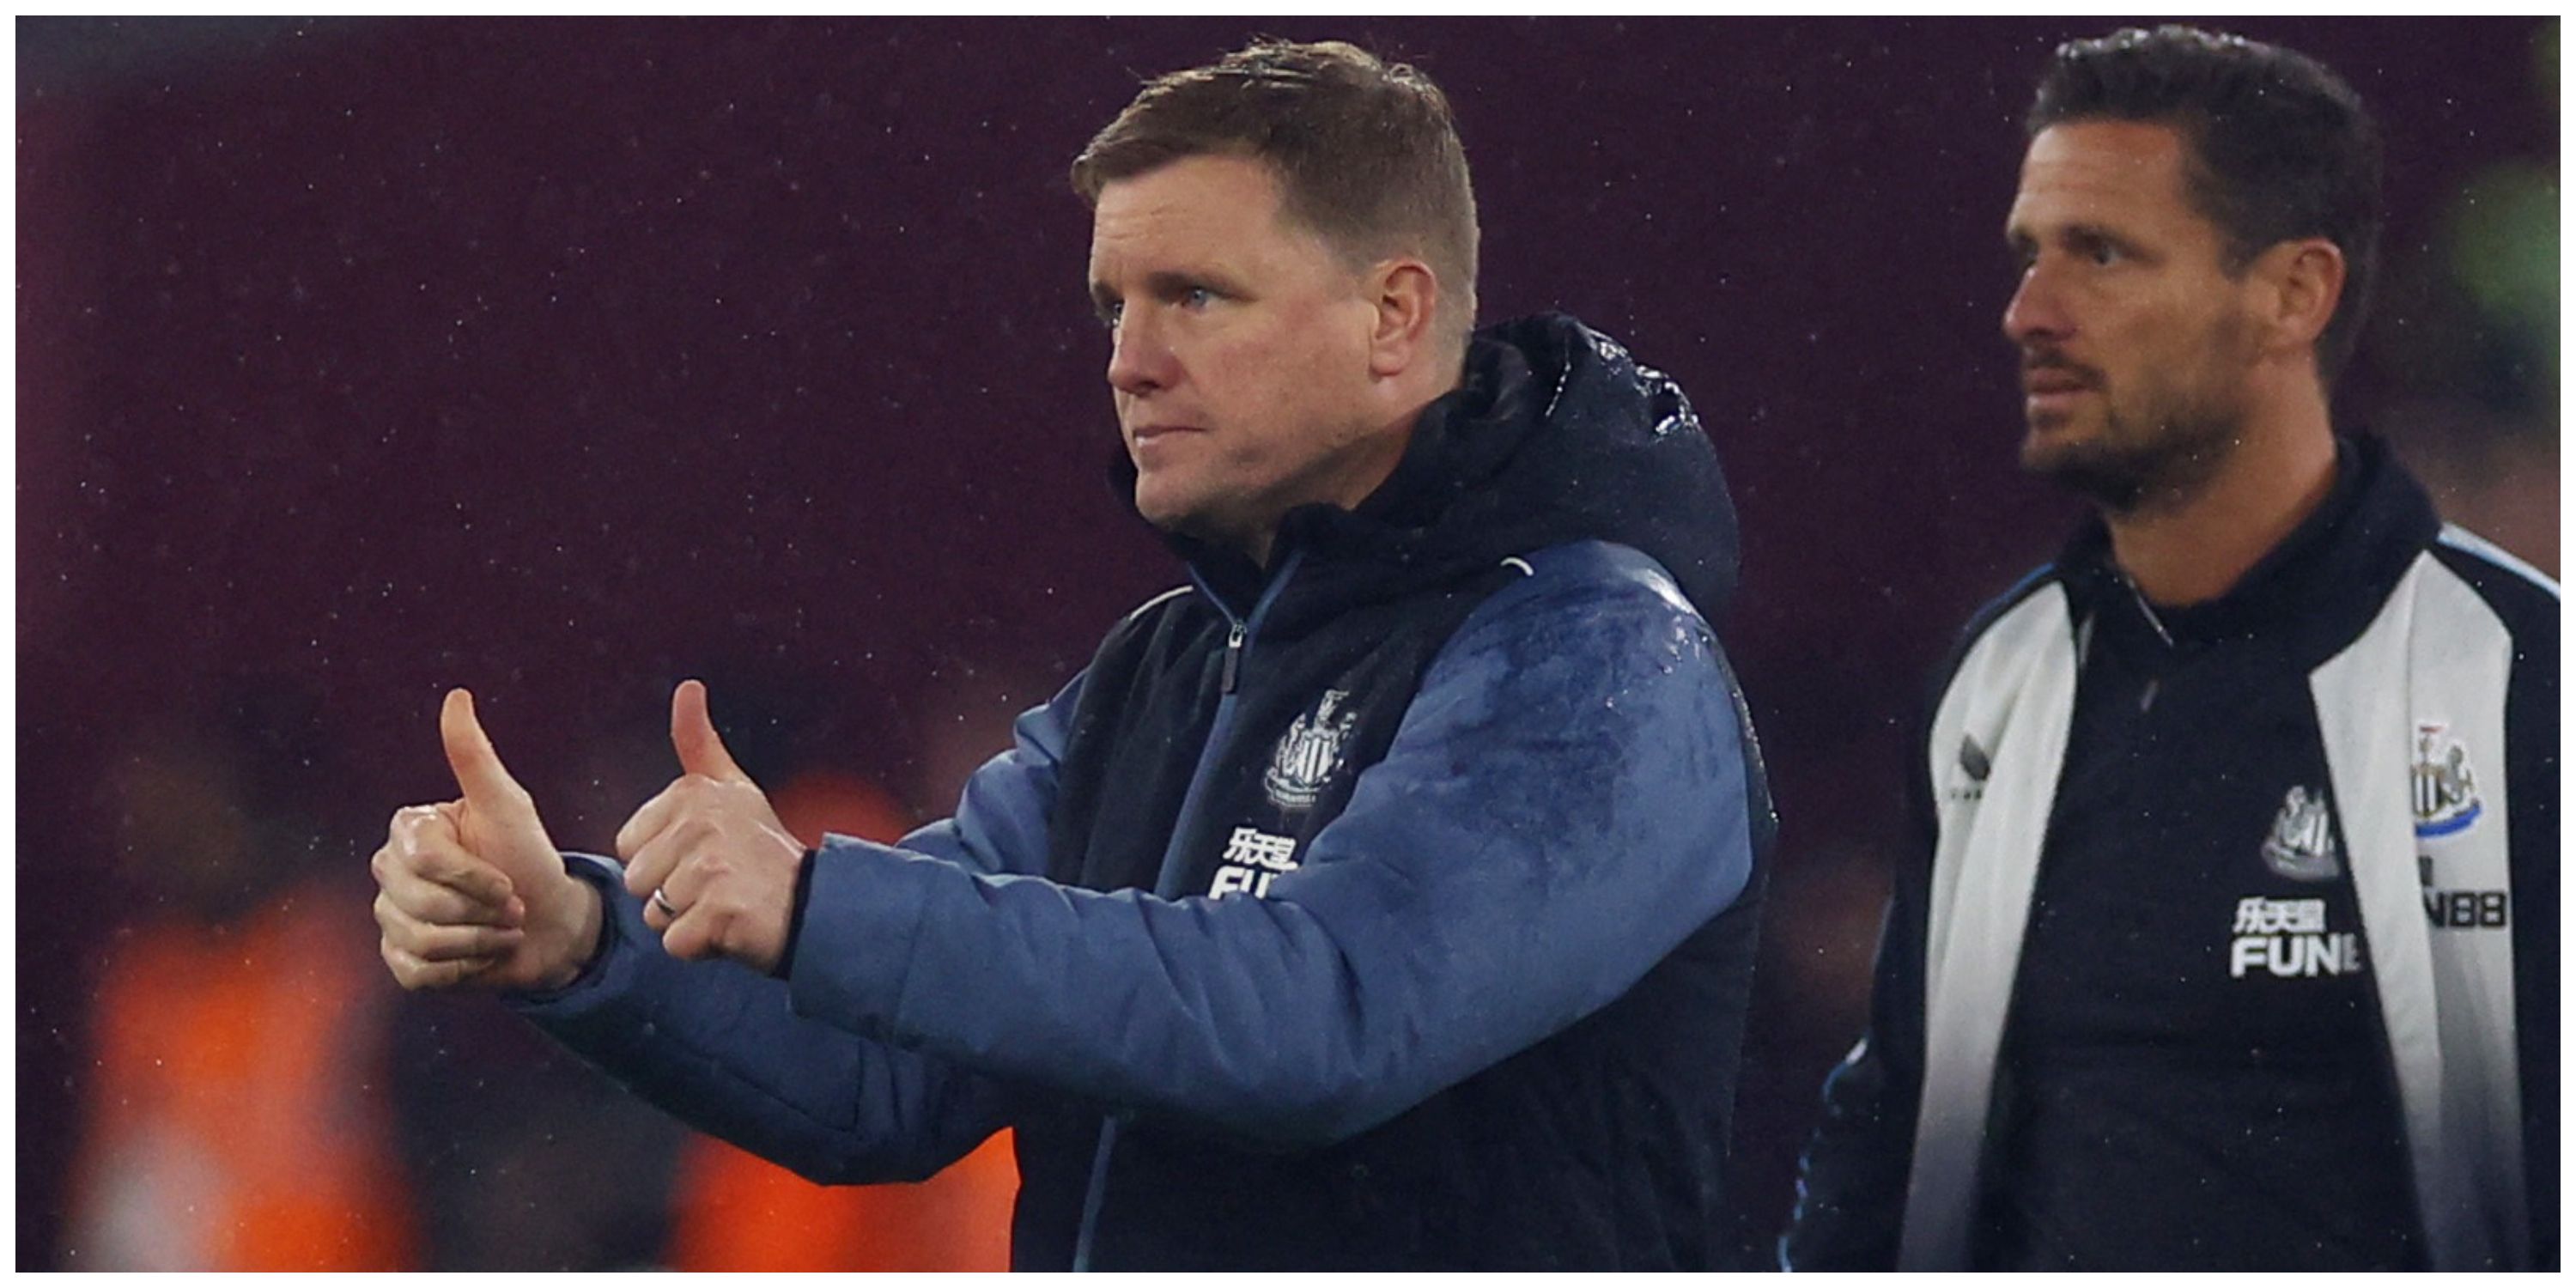 Newcastle United manager Eddie Howe giving thumbs up